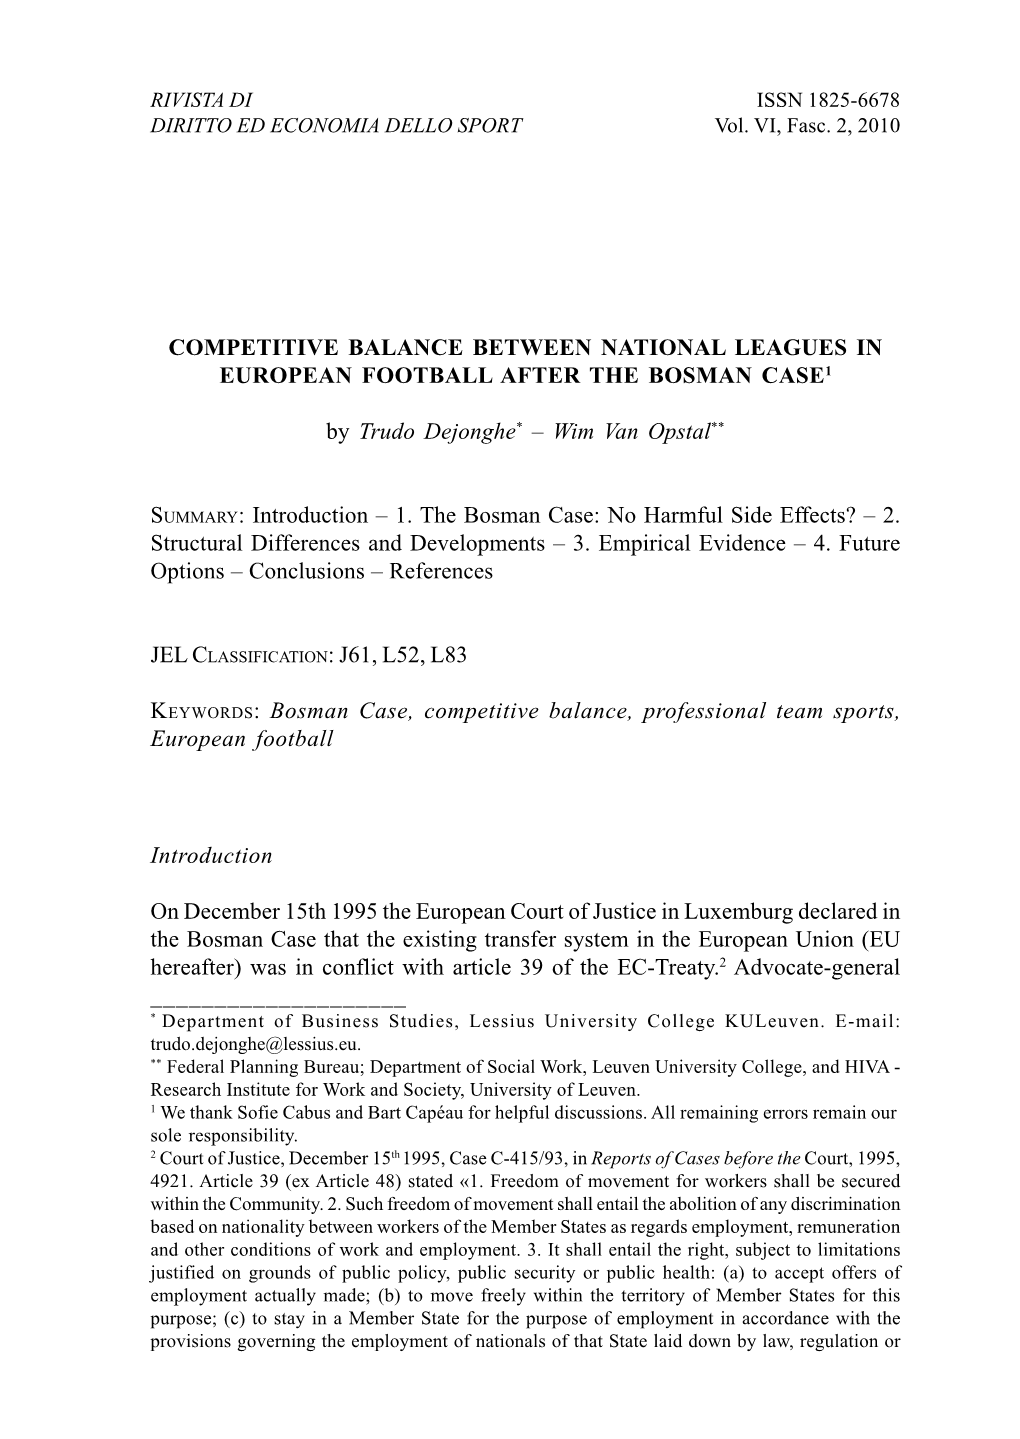 Competitive Balance Between National Leagues in European Football After the Bosman Case1